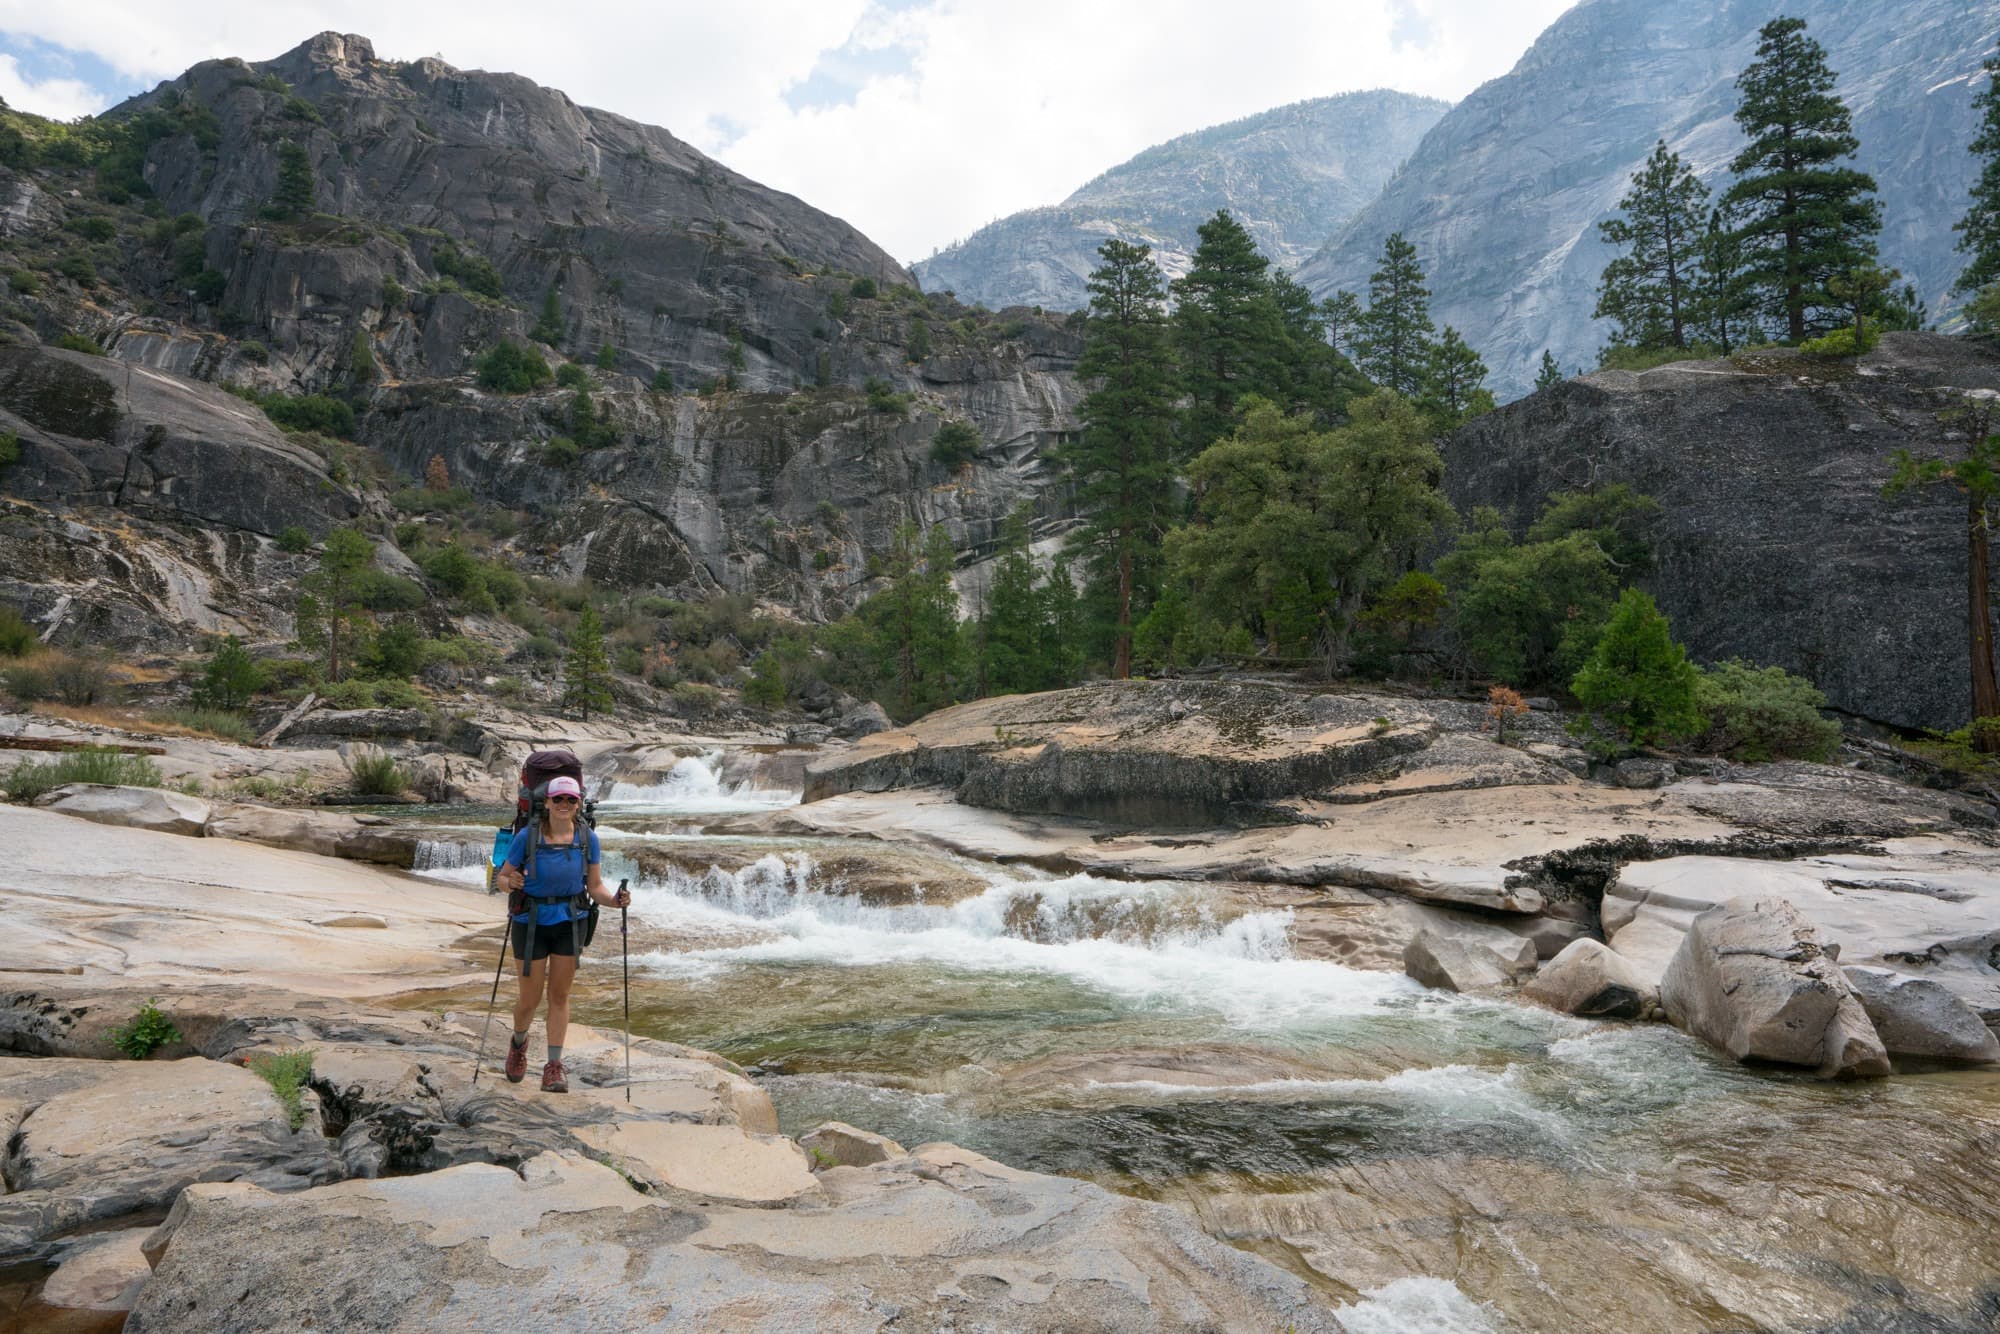 Plan an epic Yosemite backpacking trip through the Grand Canyon of the Tuolumne with our trail guide containing info on permits, transportation & more.